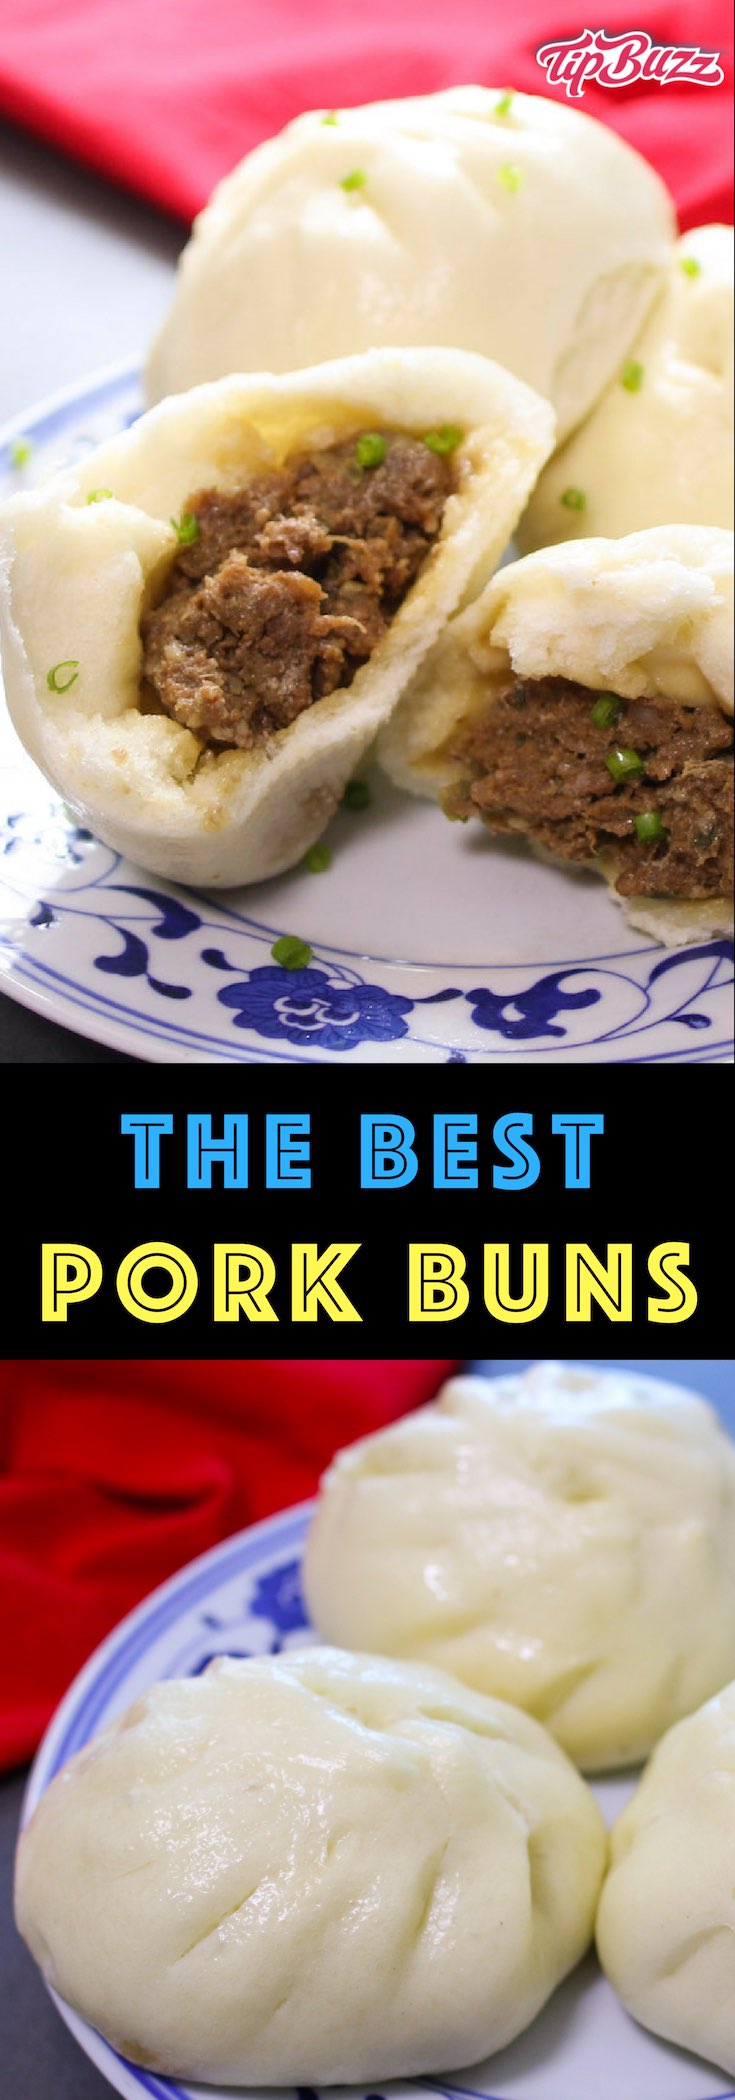 Pork Buns are a Chinese dim sum tradition consisting of soft steamed buns with a juicy and flavorful pork filling inside. They're a great grab-and-go snack, and fit nicely into any Asian-themed meal or potluck.